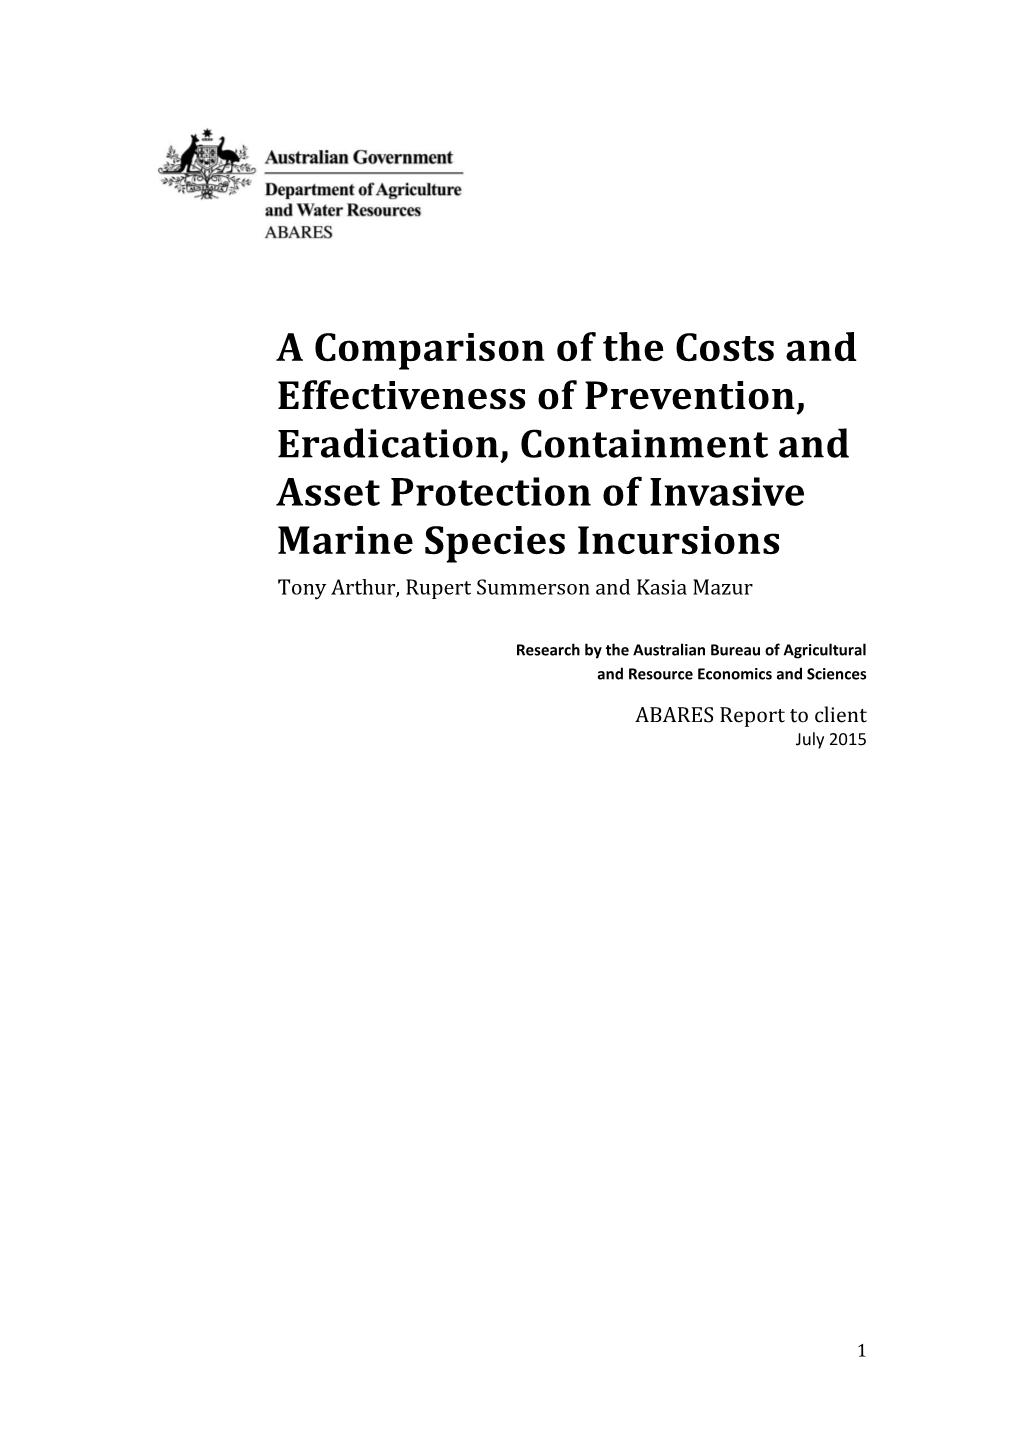 A Comparison of the Costs and Effectiveness of Prevention, Eradication, Containment And